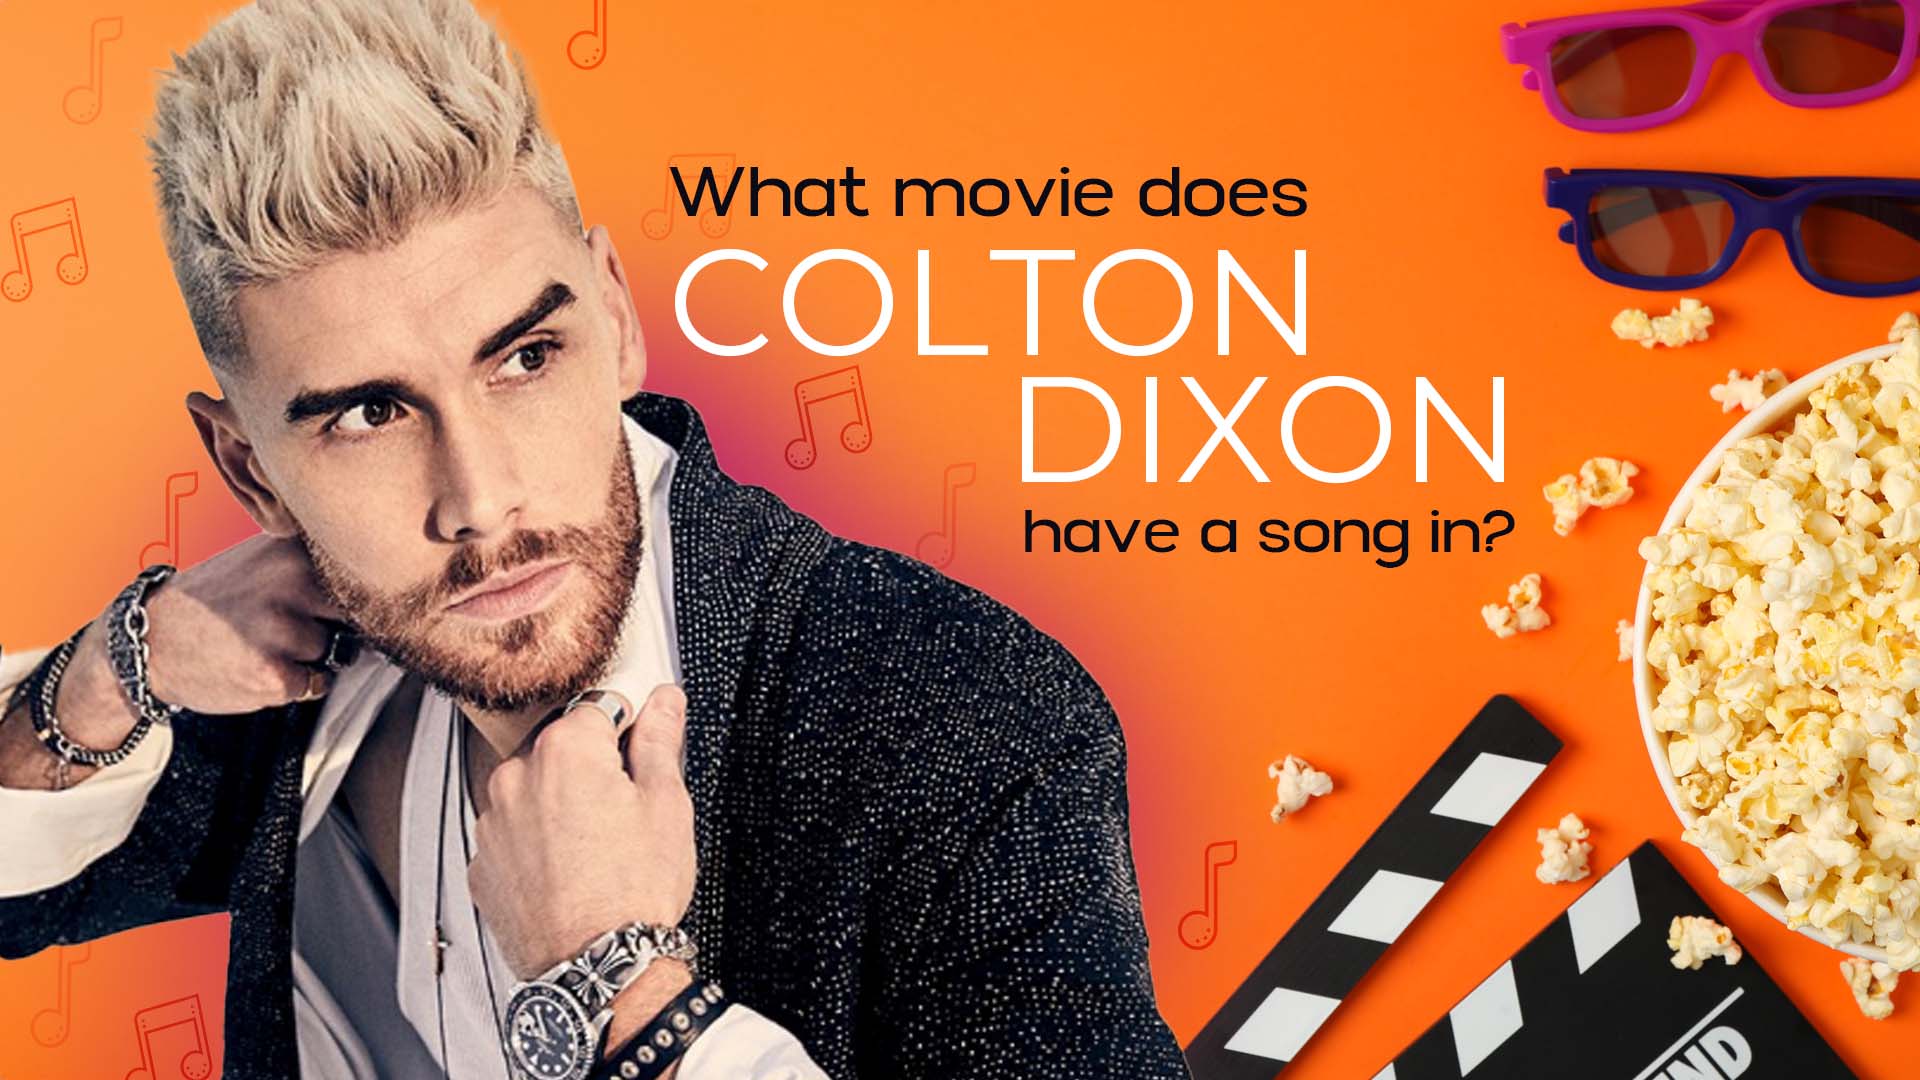 What movie does Colton Dixon have a song in?